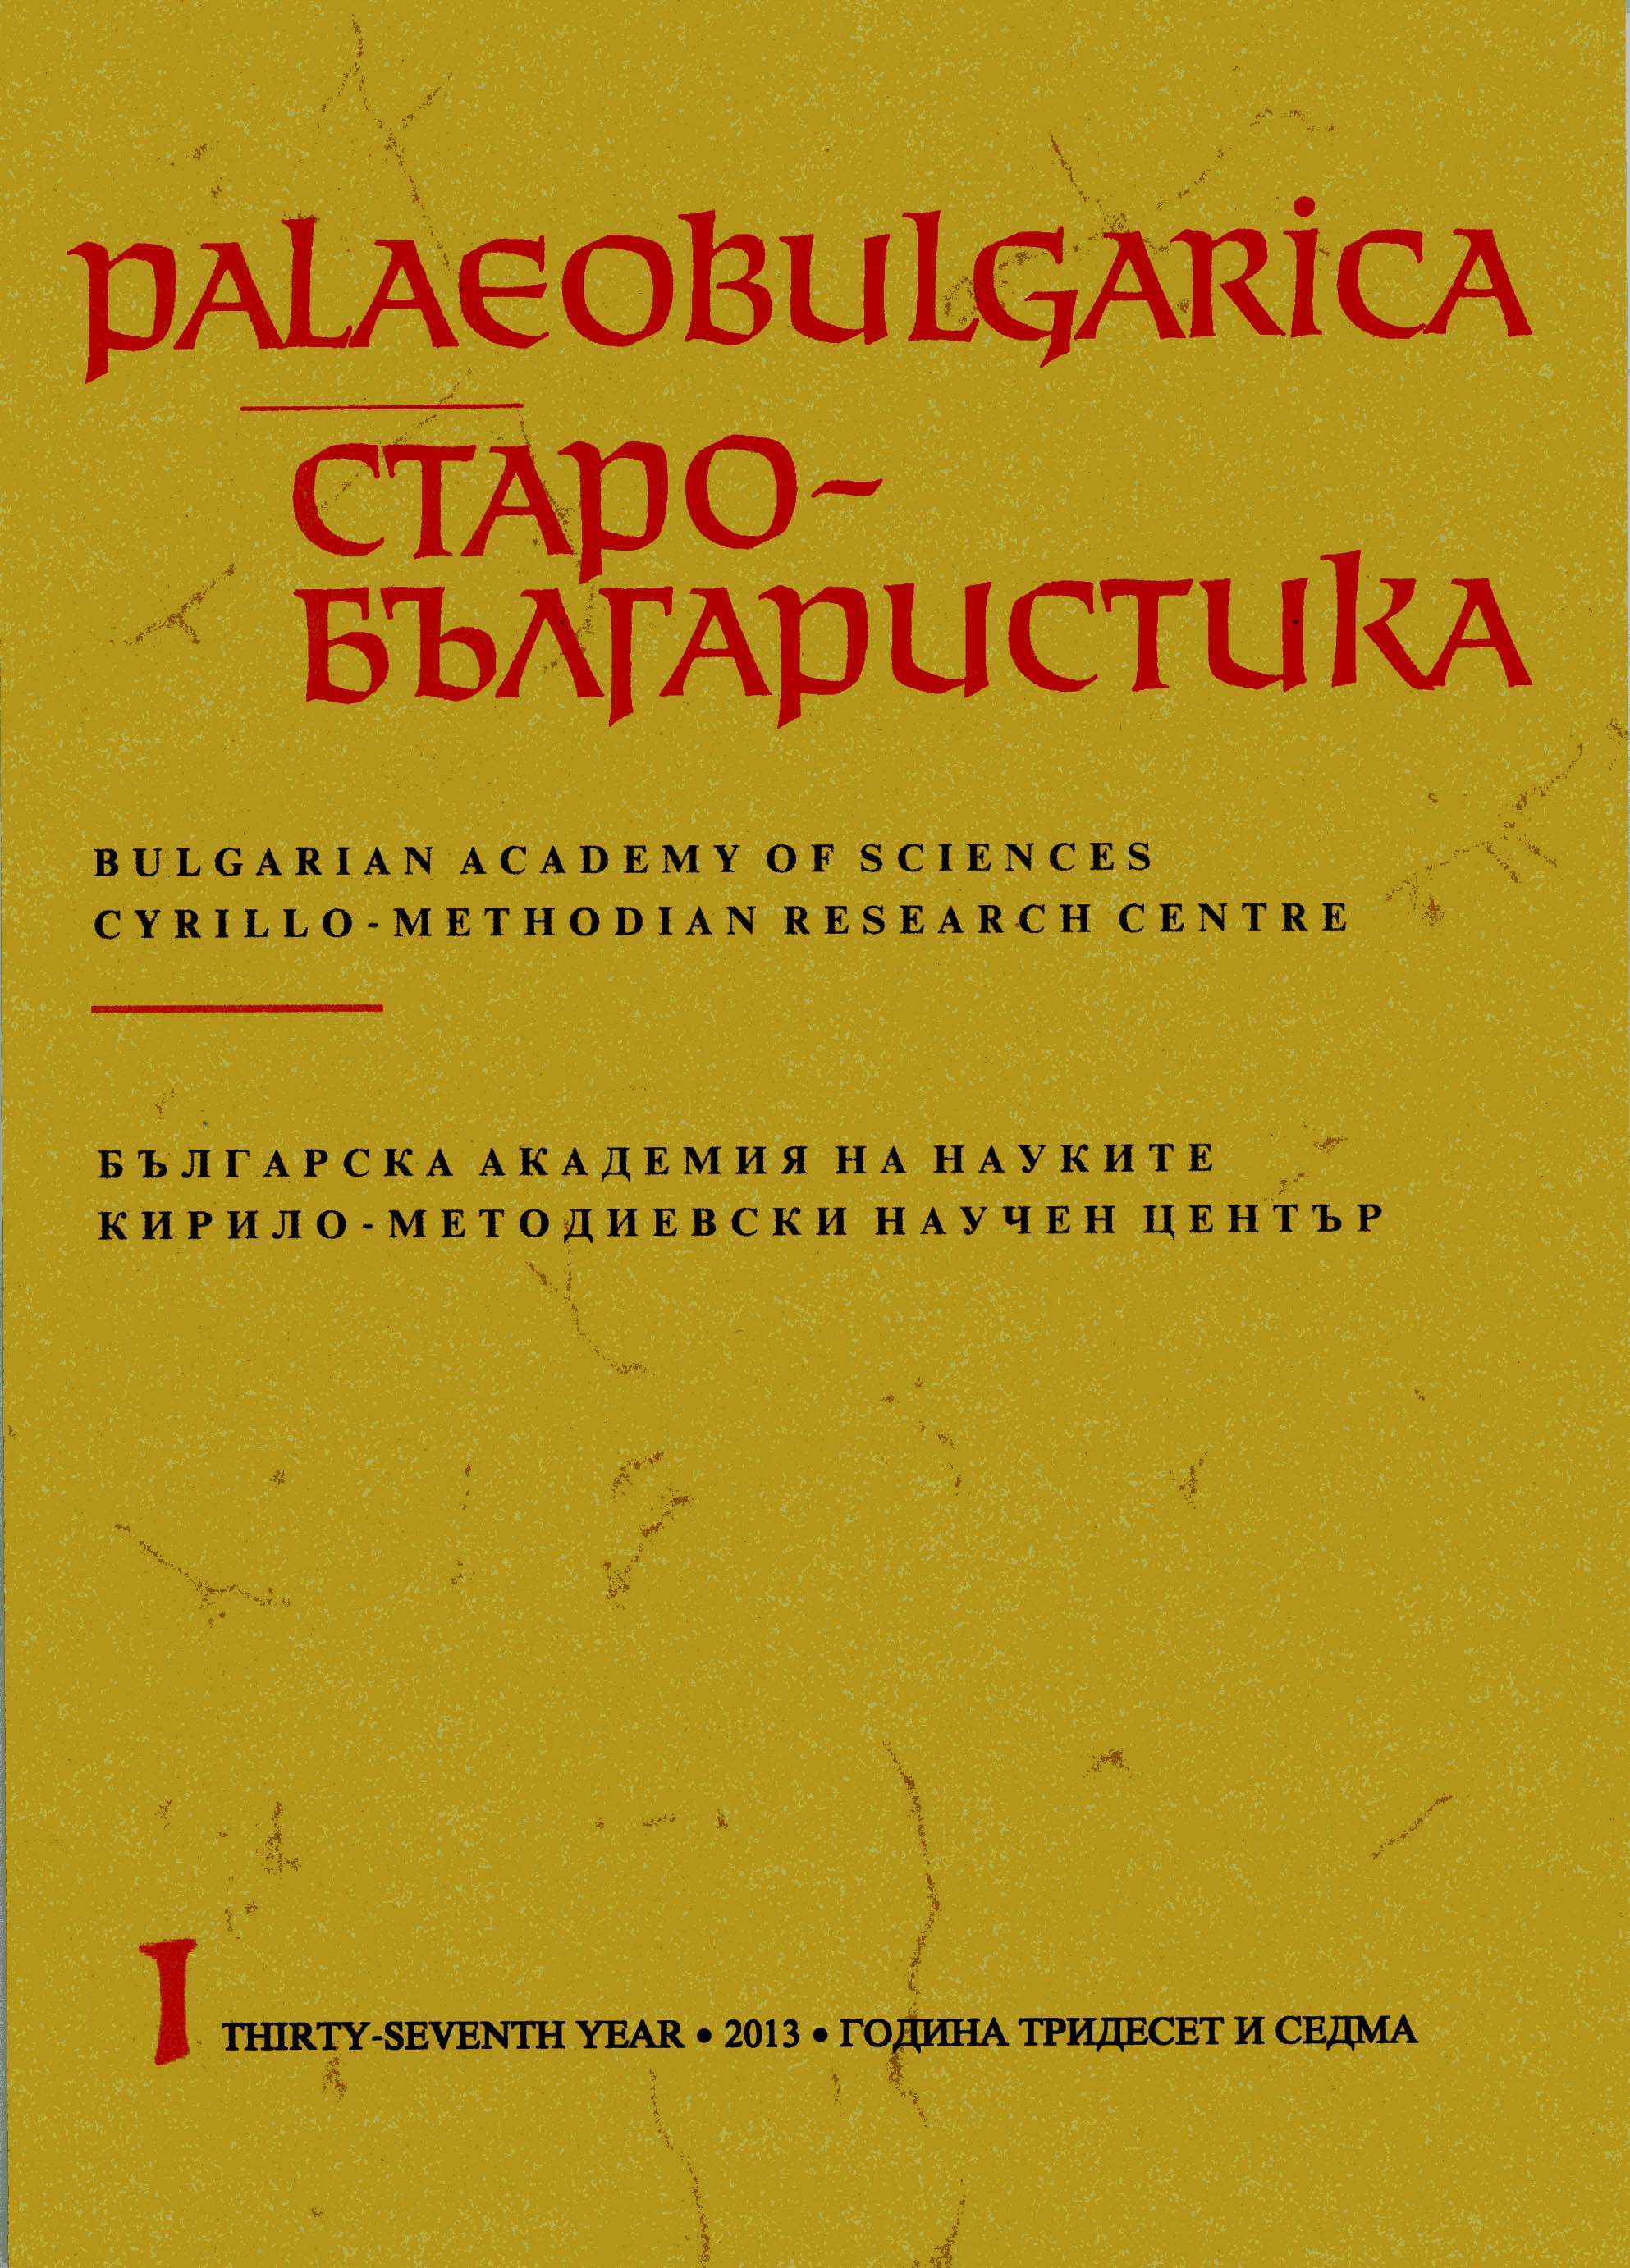 Two Theological Concepts and Their Registers, Used in the Preslav School Cover Image